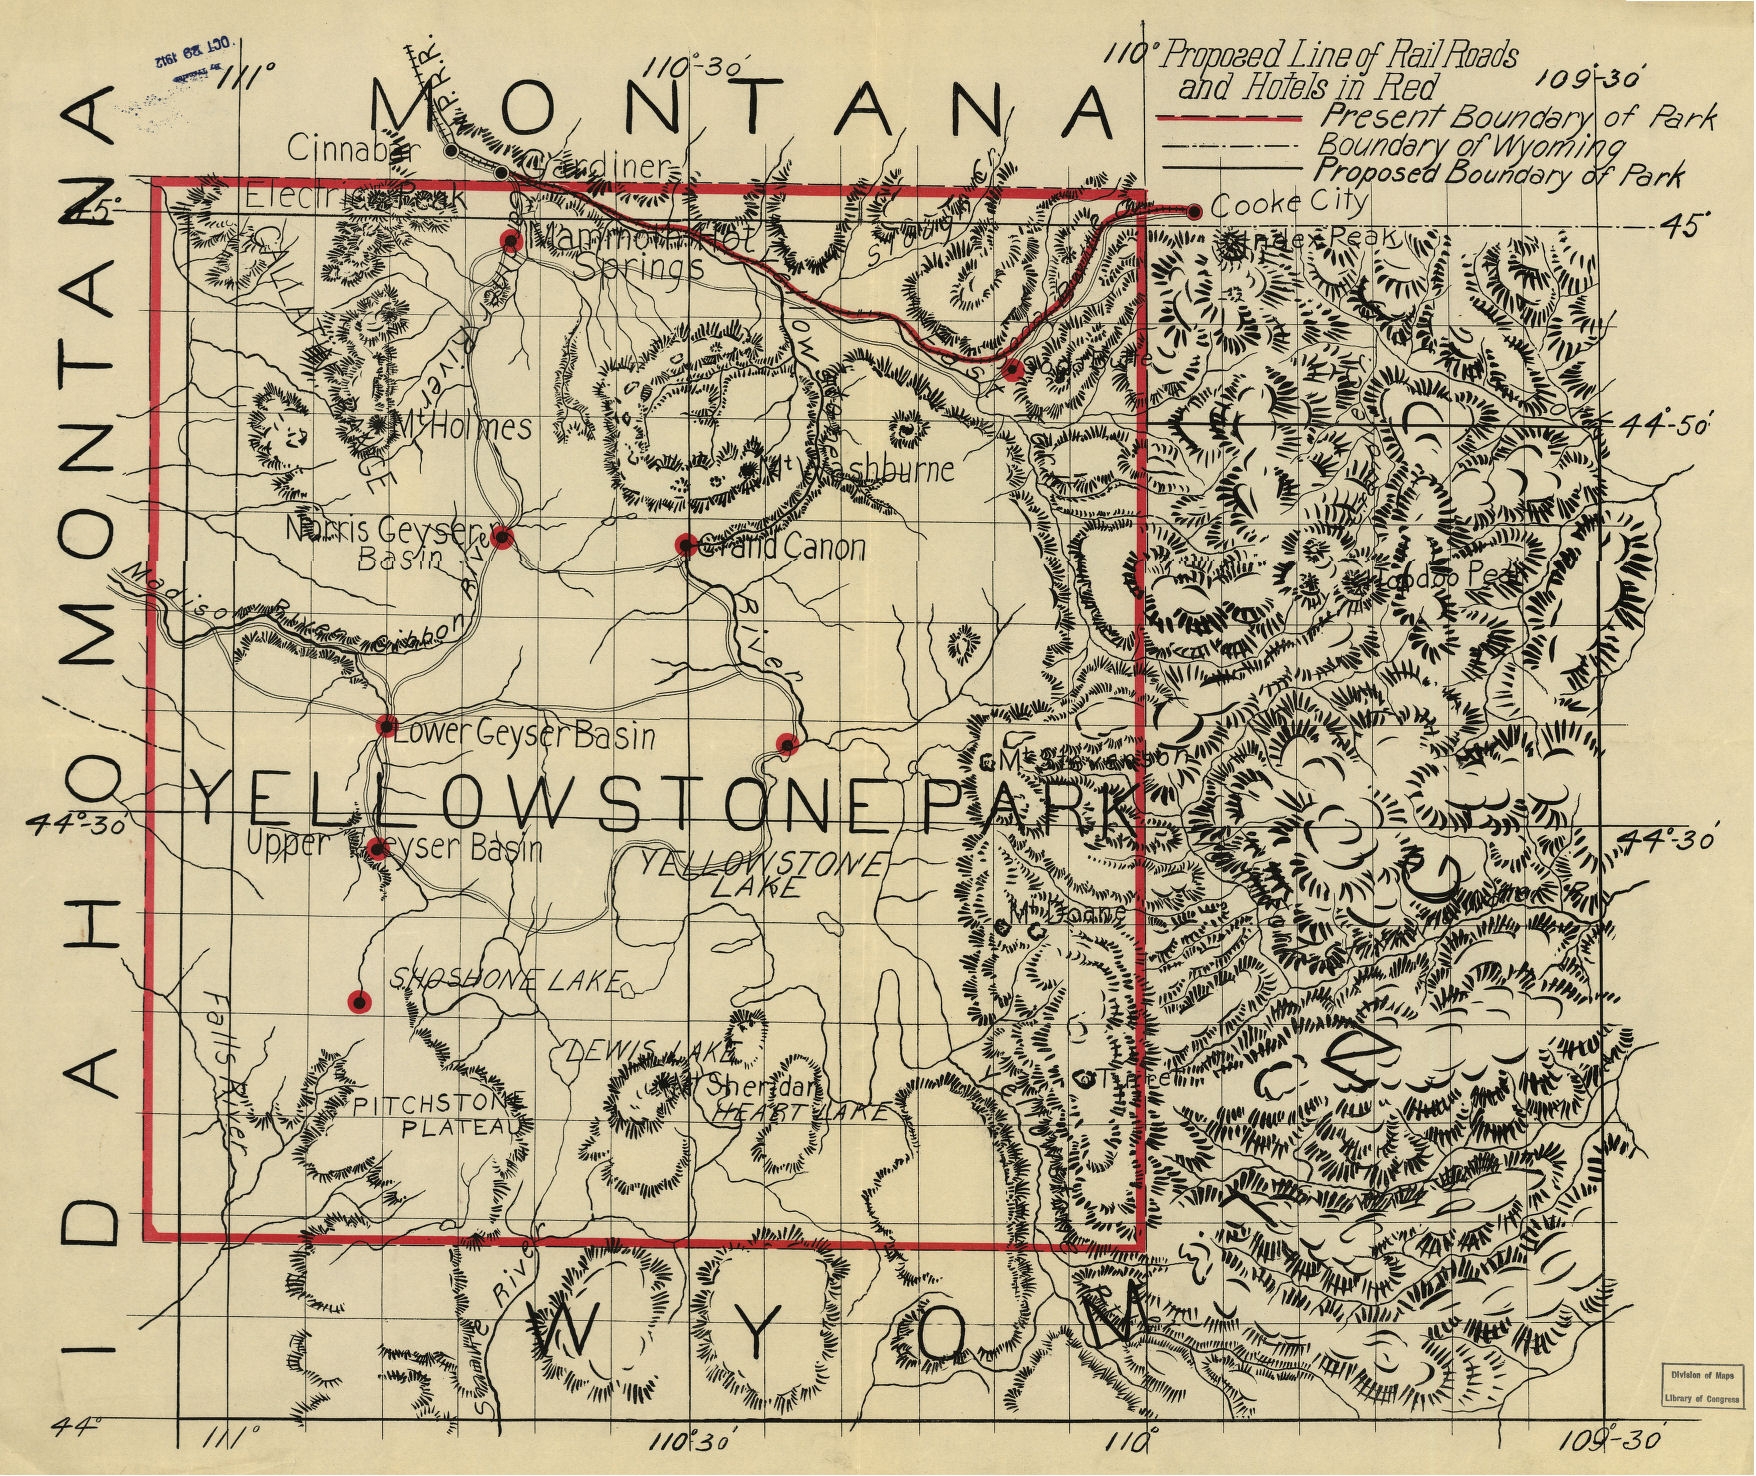 Yellowstone National Park 1912 Rail and Hotel Map from the Library of Congress Collection